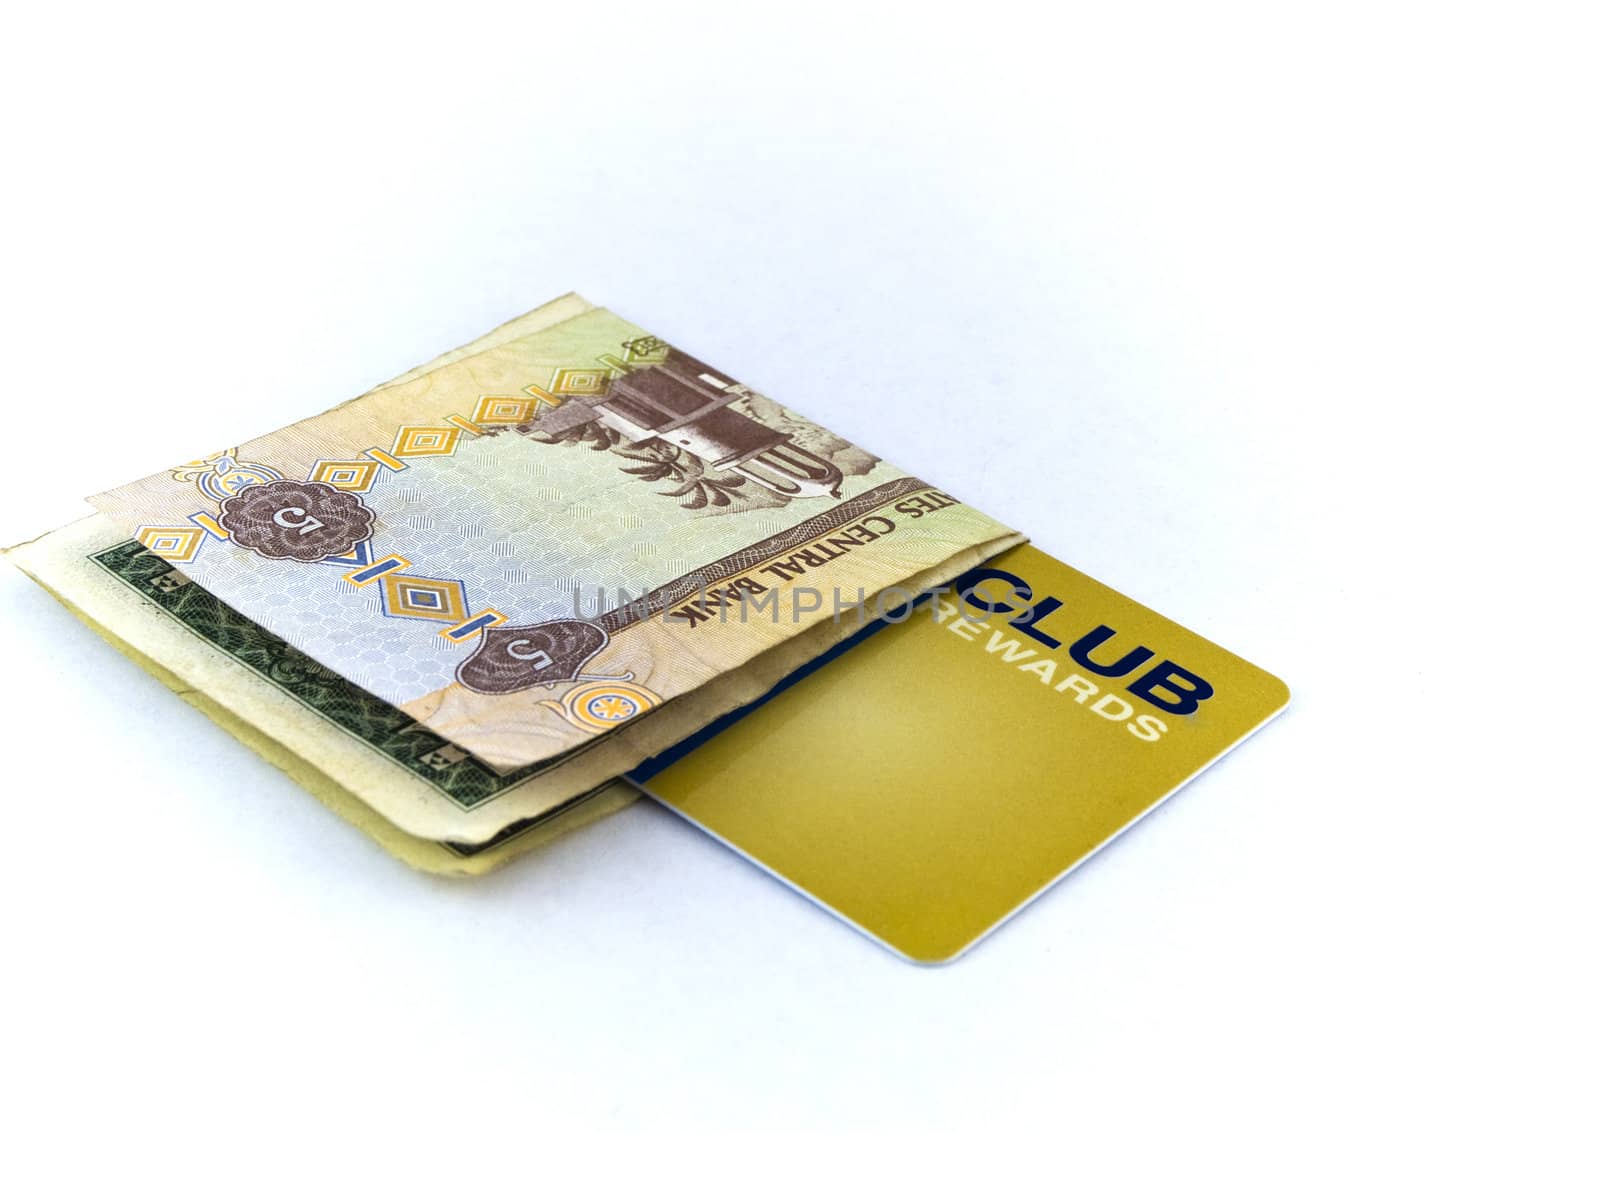 Five Dirham Note and Gold Membership Club Card on White Background